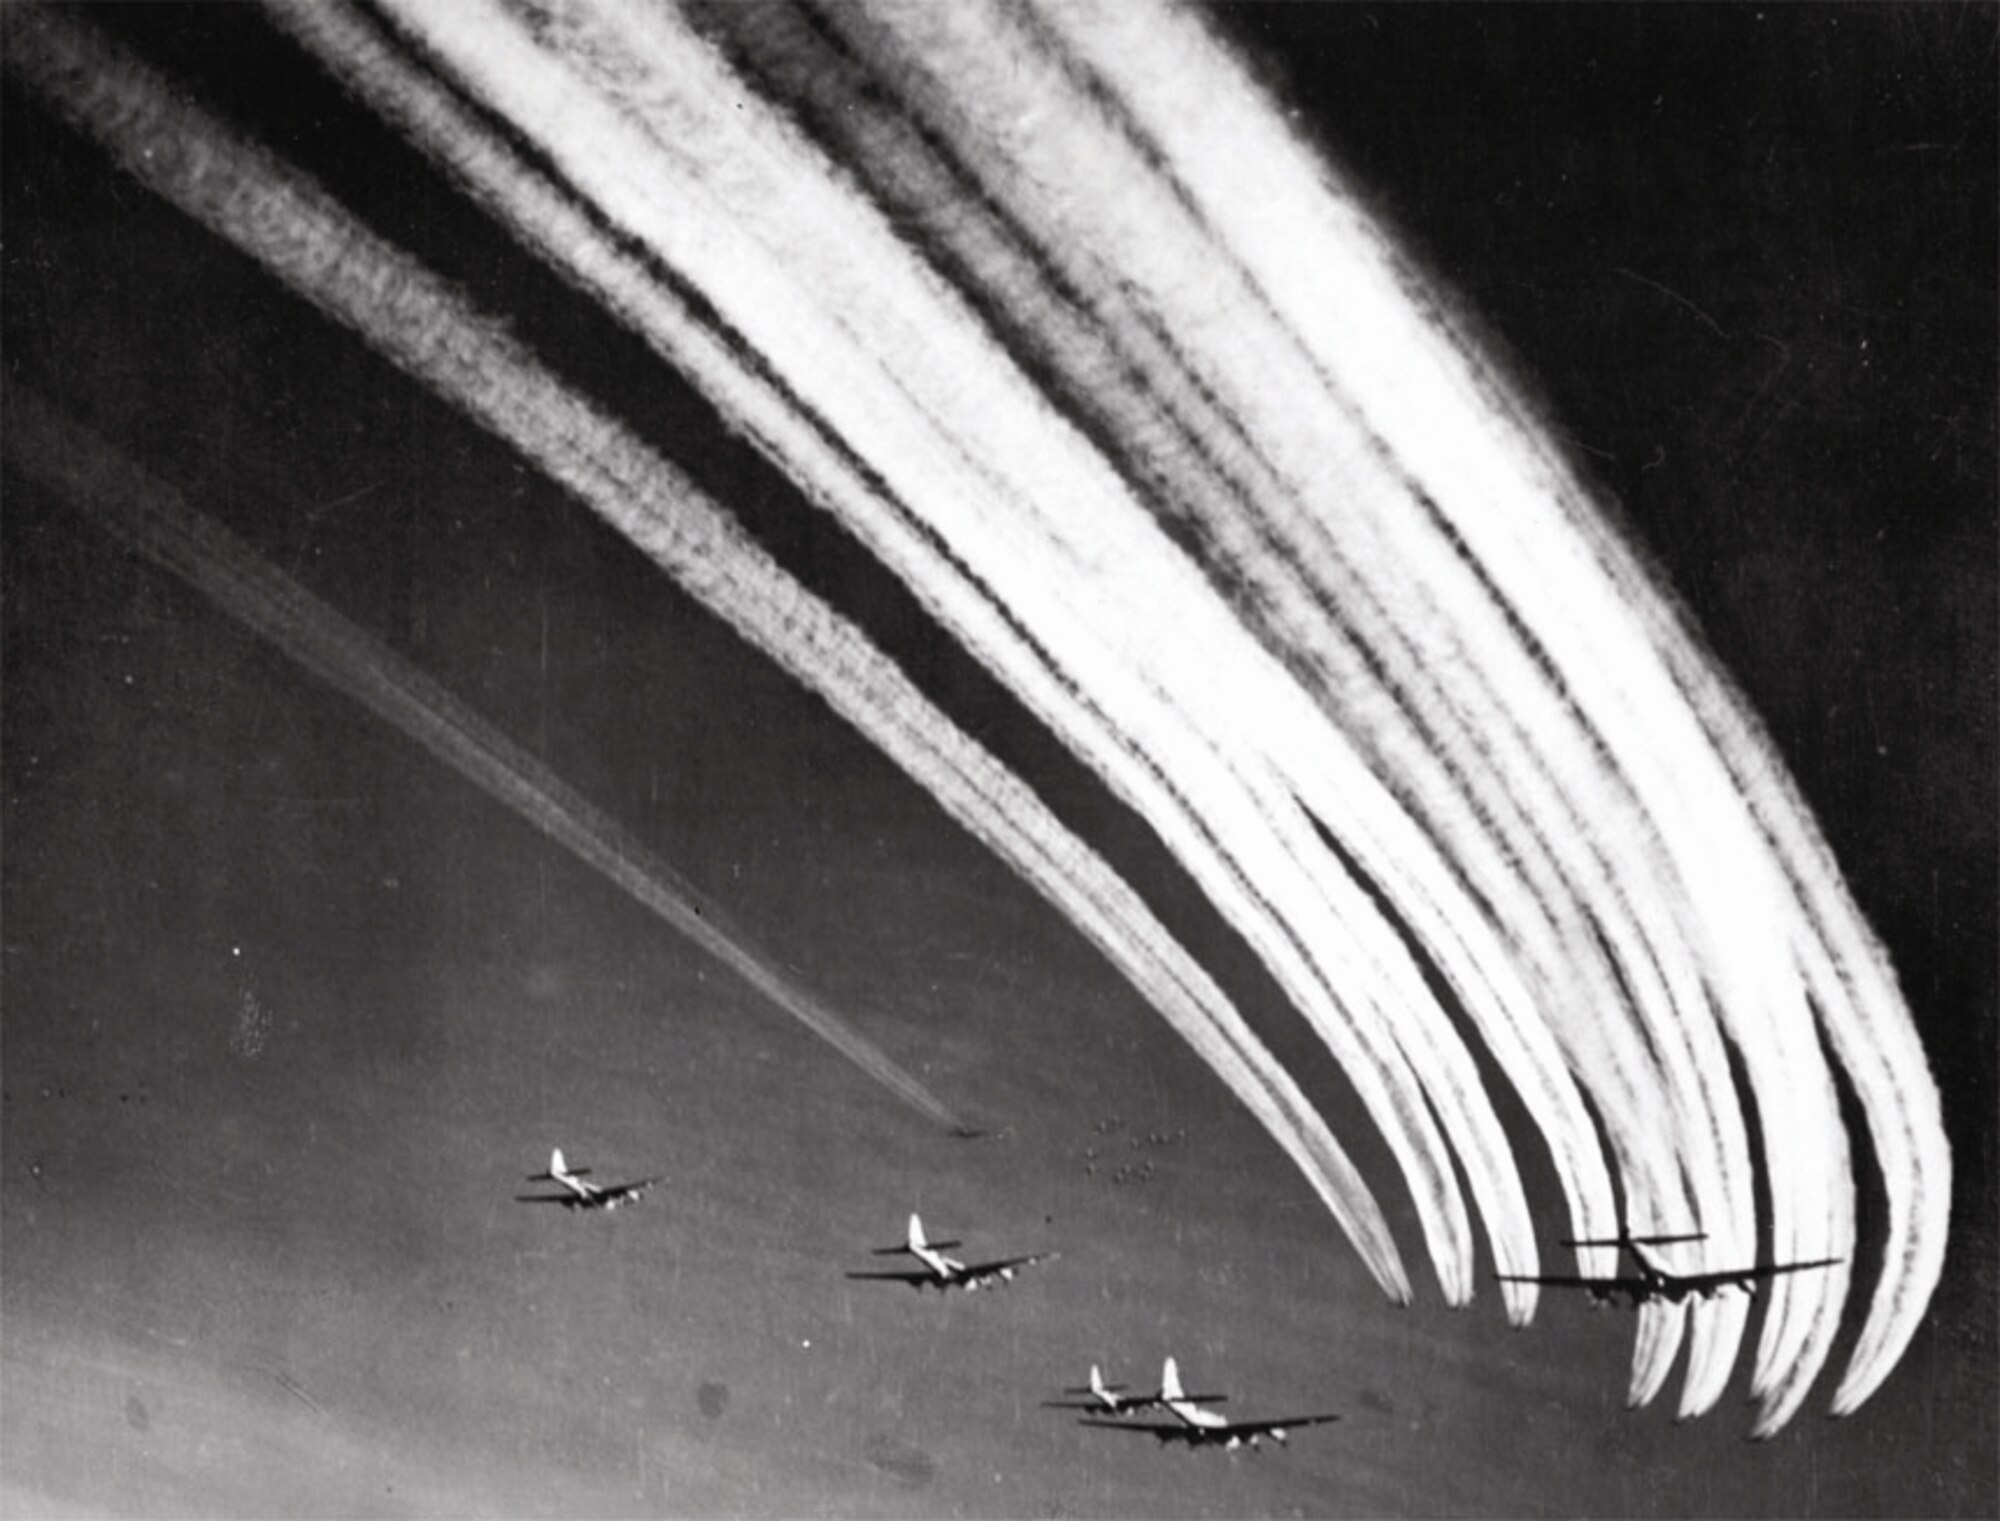 B-17 vapor trails fill the sky as Flying Fortresses join with each other for a mission. (U.S. Air Force photo)